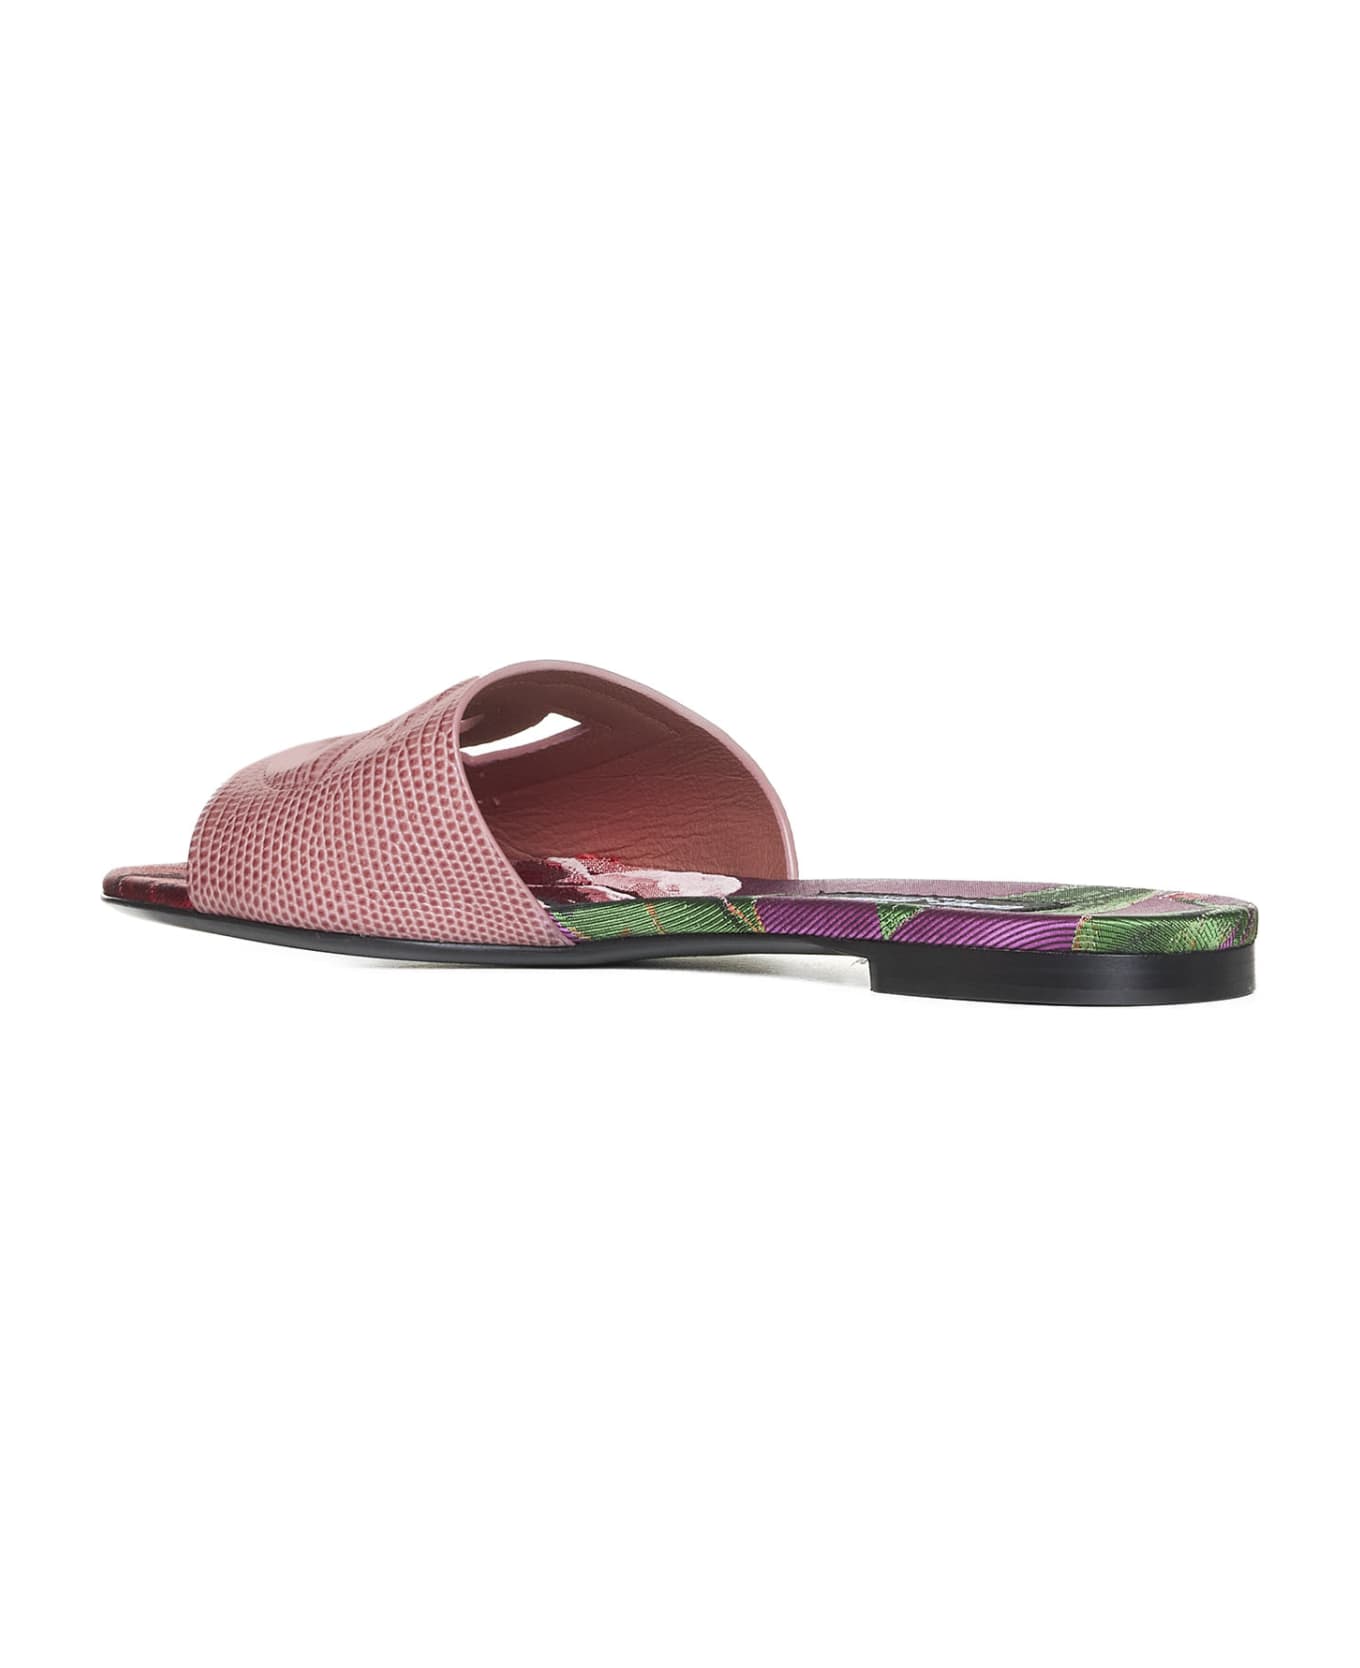 Dolce & Gabbana Slippers - Rosa ant multicolor